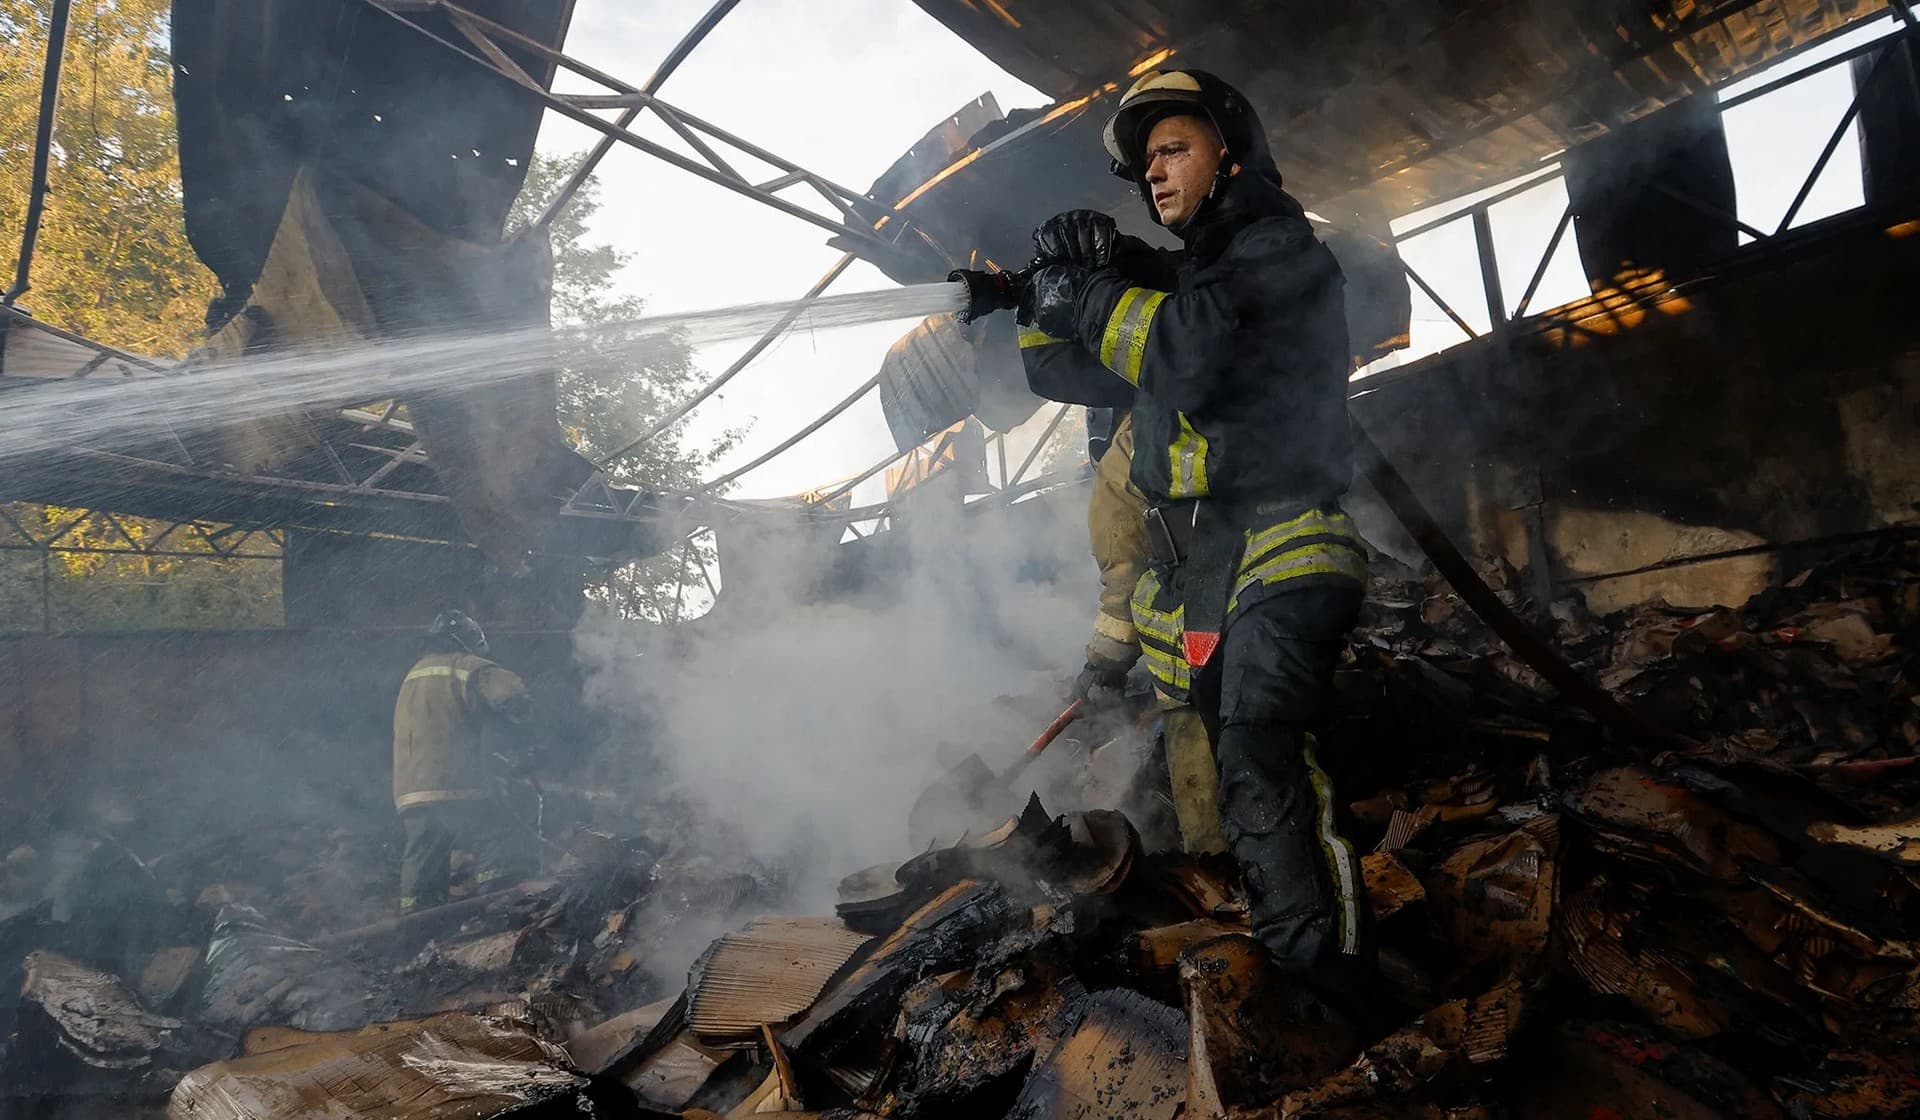 Firefighters work to extinguish fire at a warehouse destroyed in shelling in Donetsk